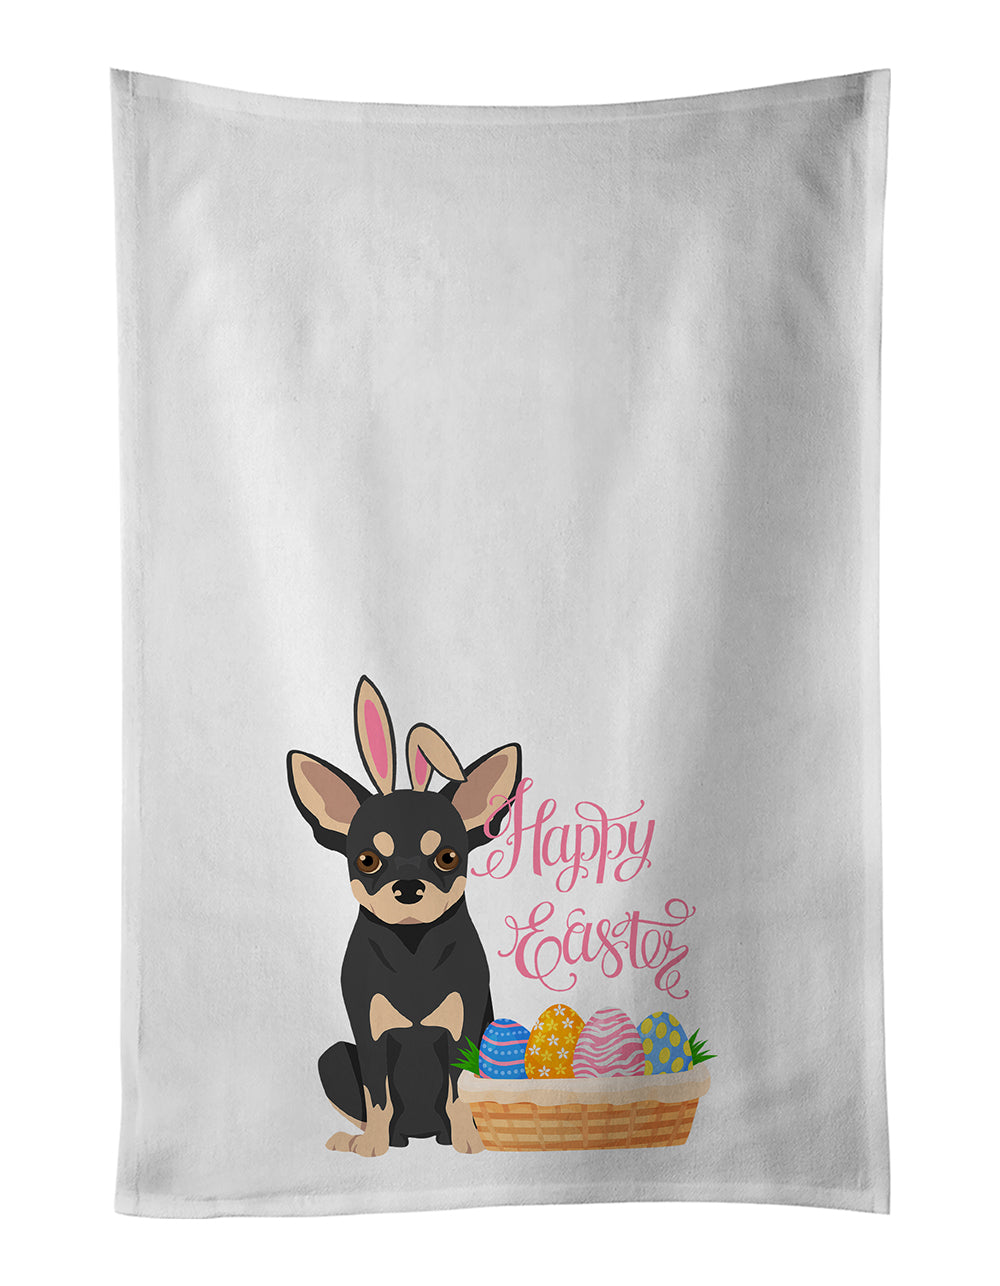 Buy this Black and Cream Chihuahua Easter White Kitchen Towel Set of 2 Dish Towels